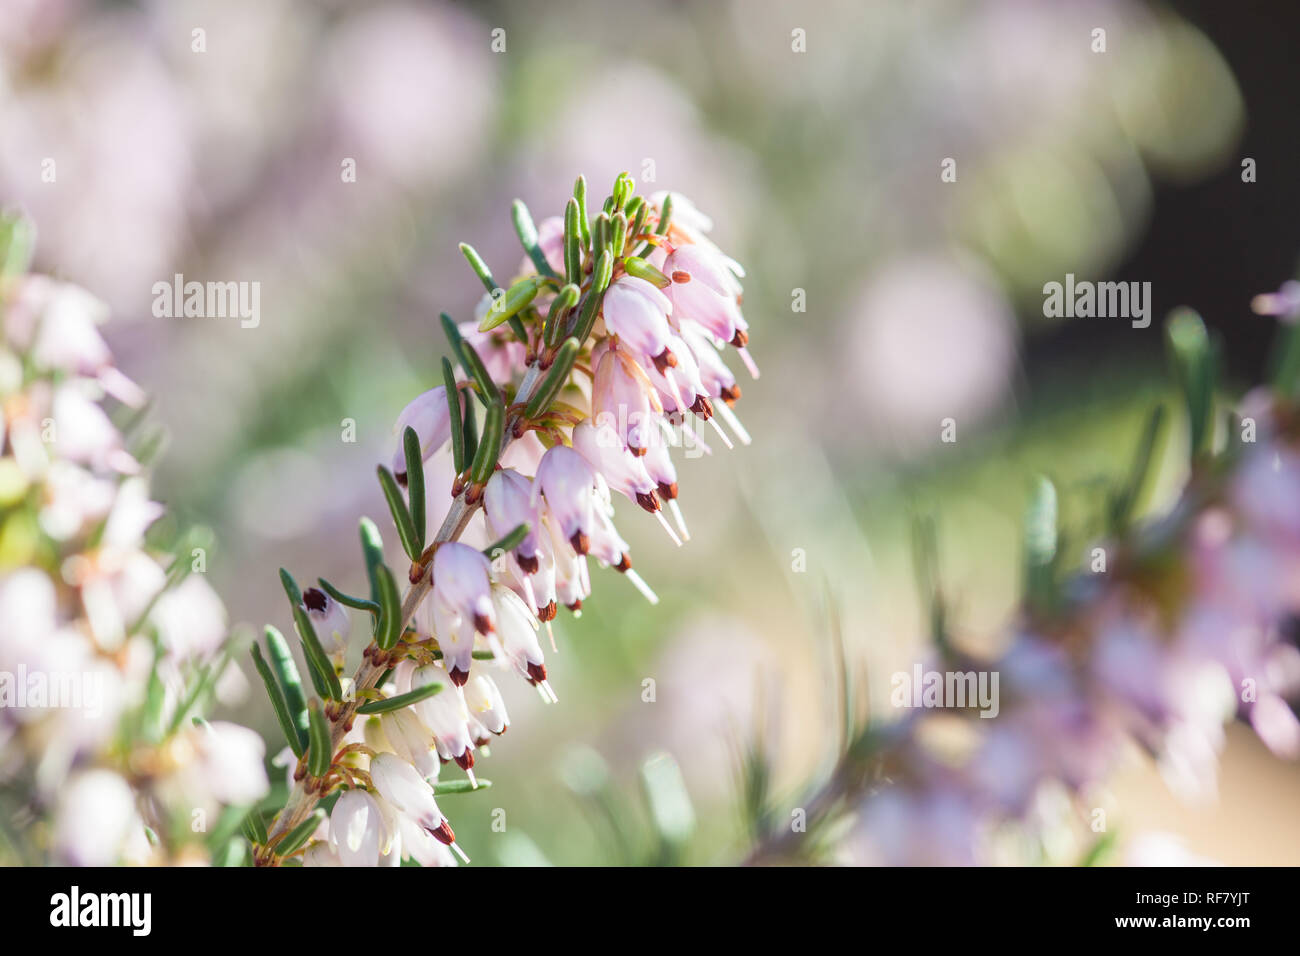 Delicate rose-pink flowers of Erica darleyensis plant (Winter Heath) in early spring garden during sunny day Stock Photo